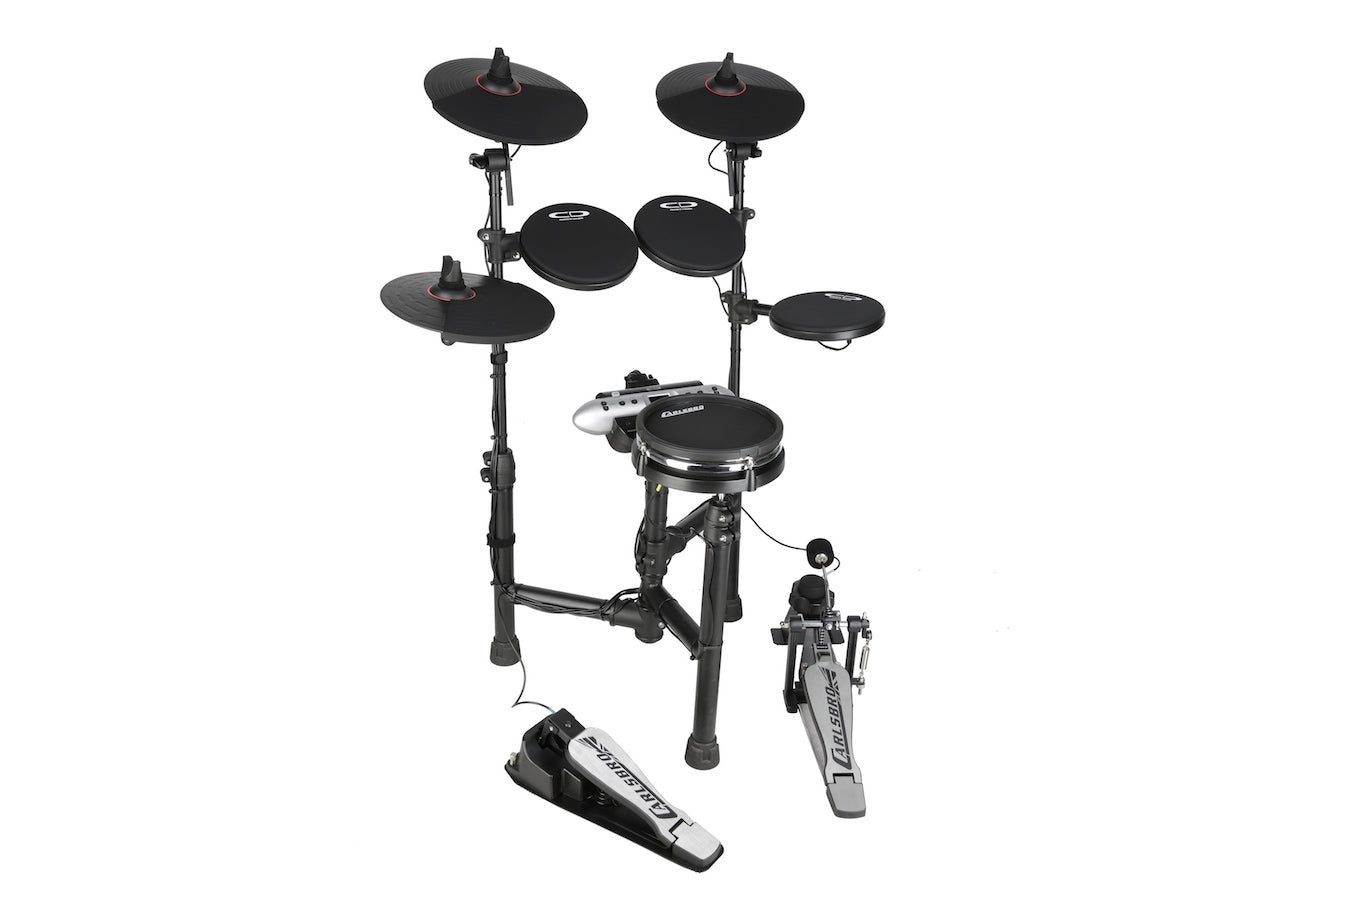 CSD130M 8-Piece Electronic Drum Kit features an 8inch Mesh snare drum pad